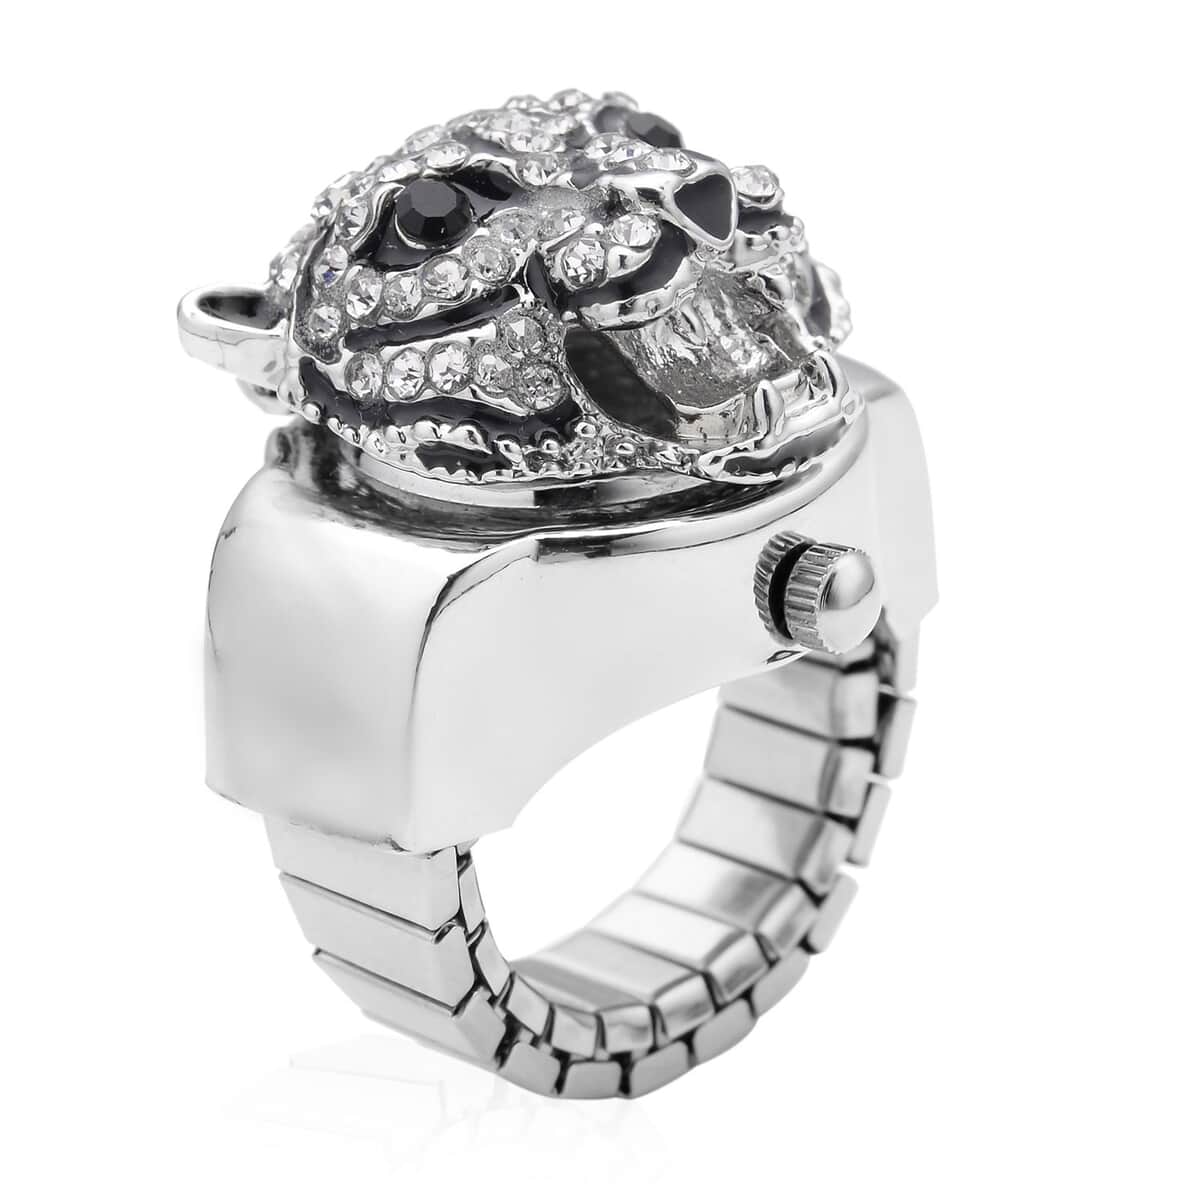 Strada White and Black Austrian Crystal, Enameled Japanese Movement Tiger Head Pattern Ring Watch in Stainless Steel (5.0-7.0In) image number 3